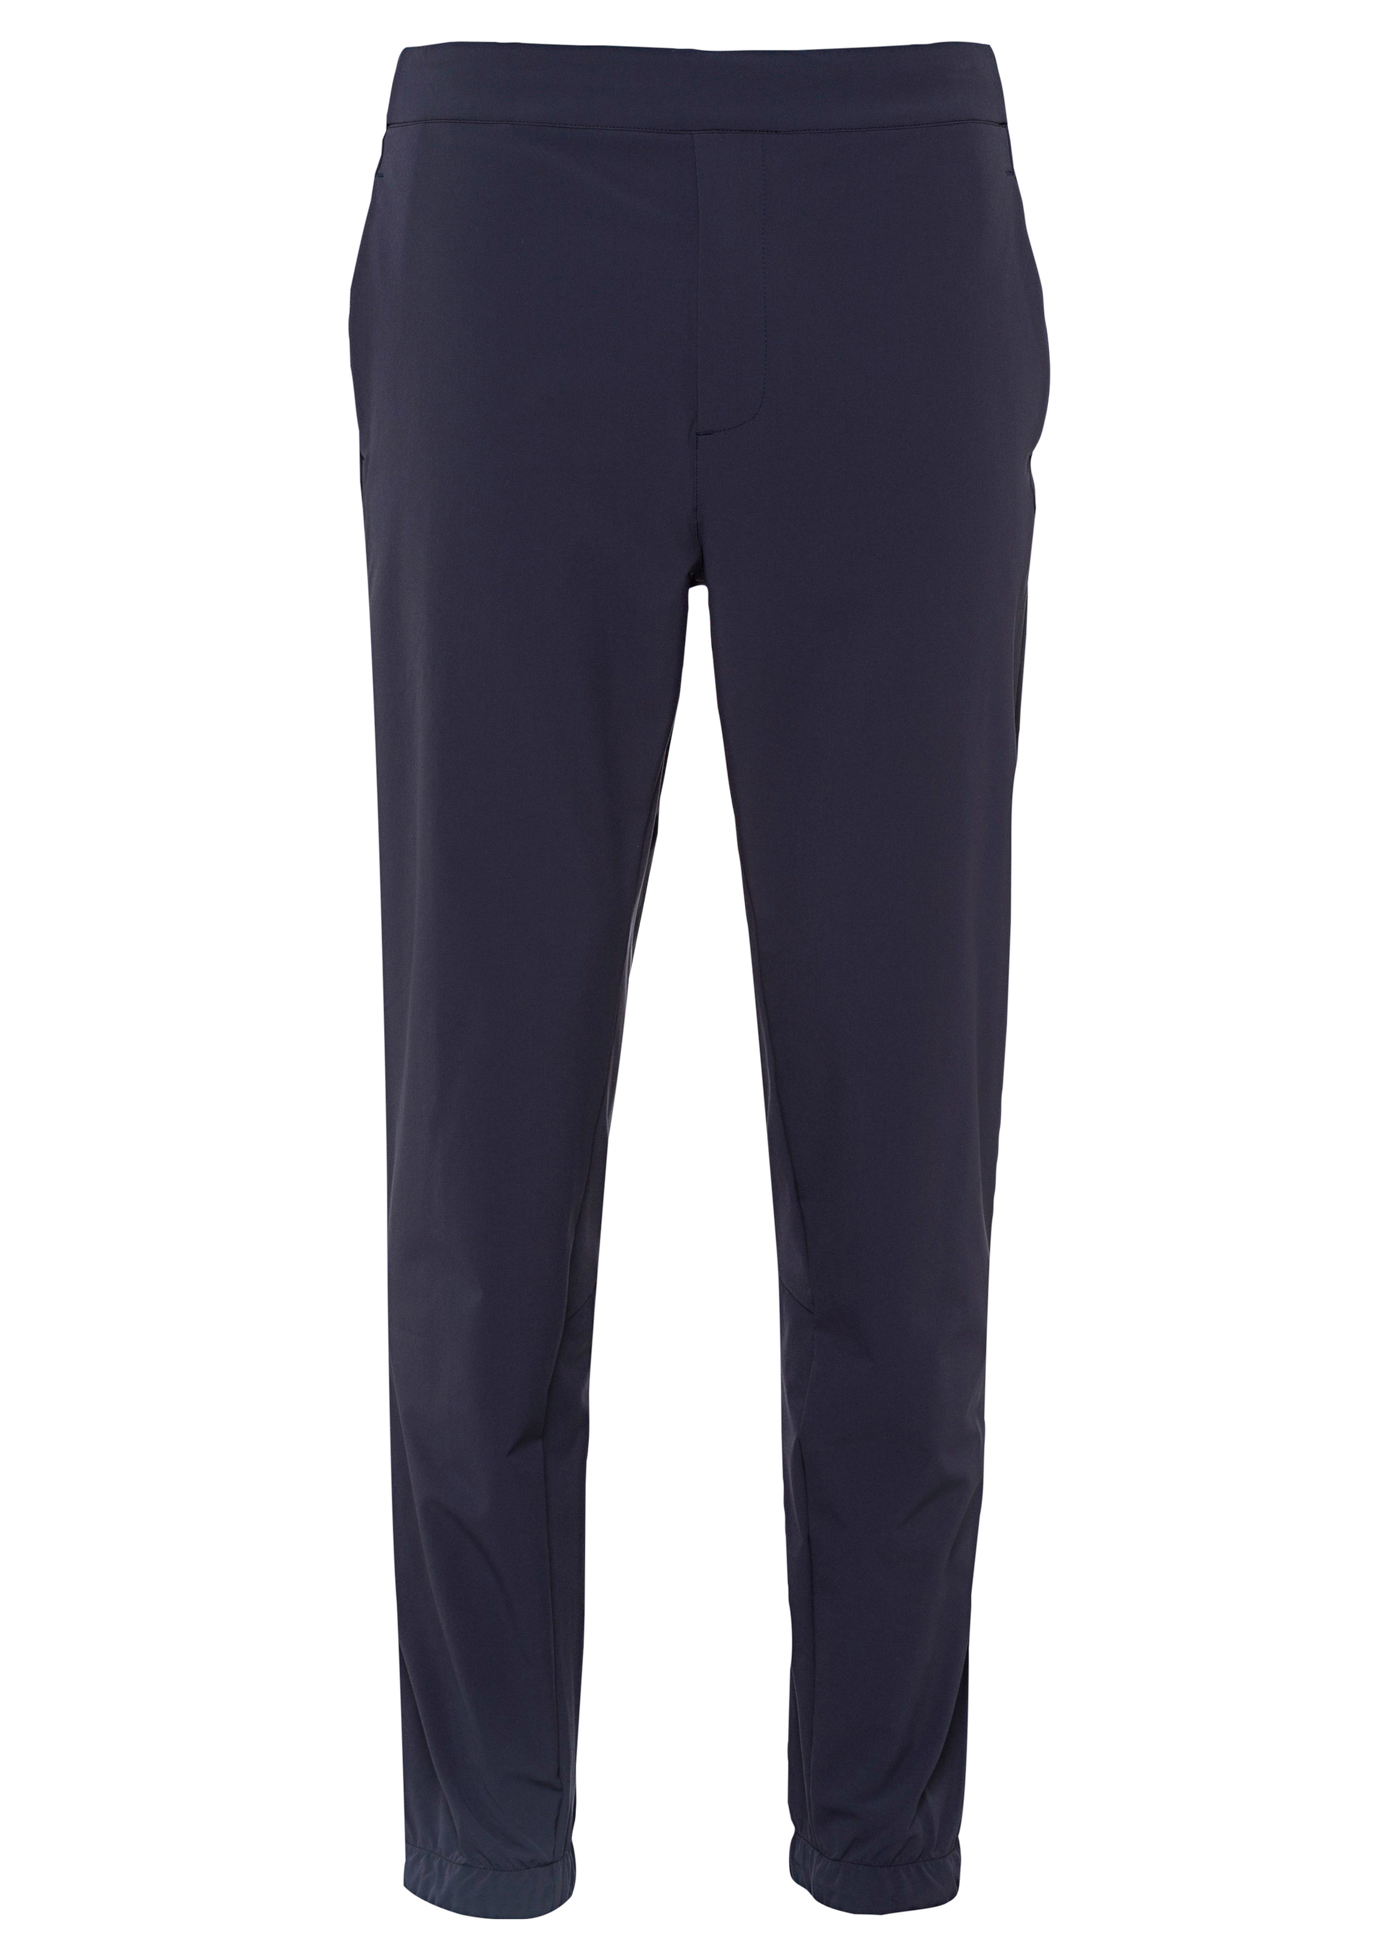 ACTIVE PANTS M NAVY M image number 0